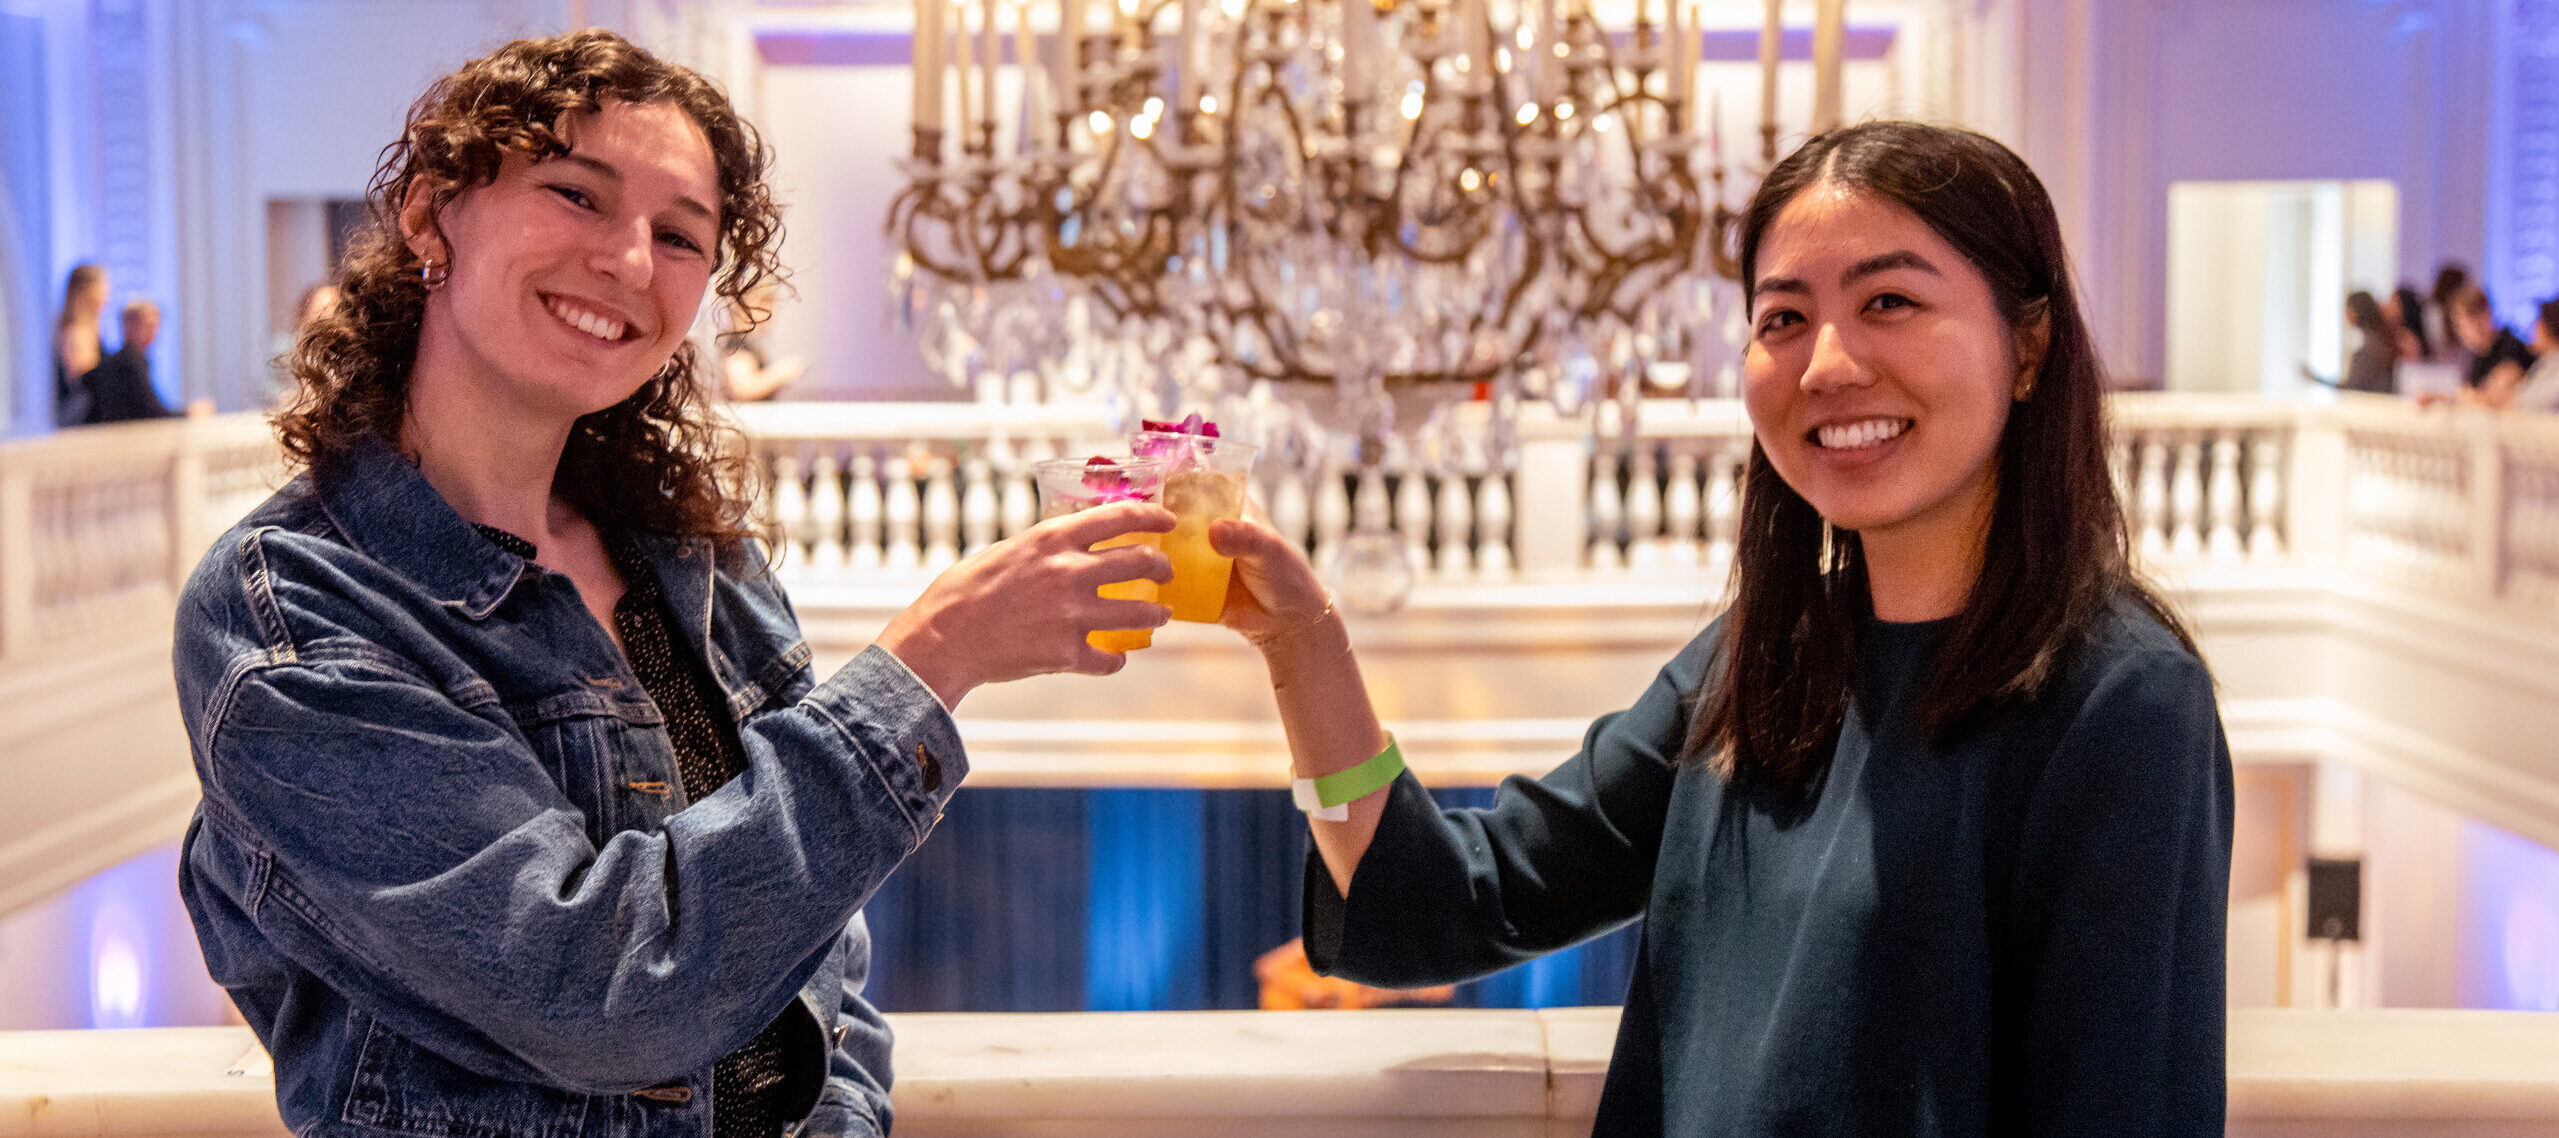 Two women stand in front of a white marble railing and tap their drinks together, smiling at the camera.